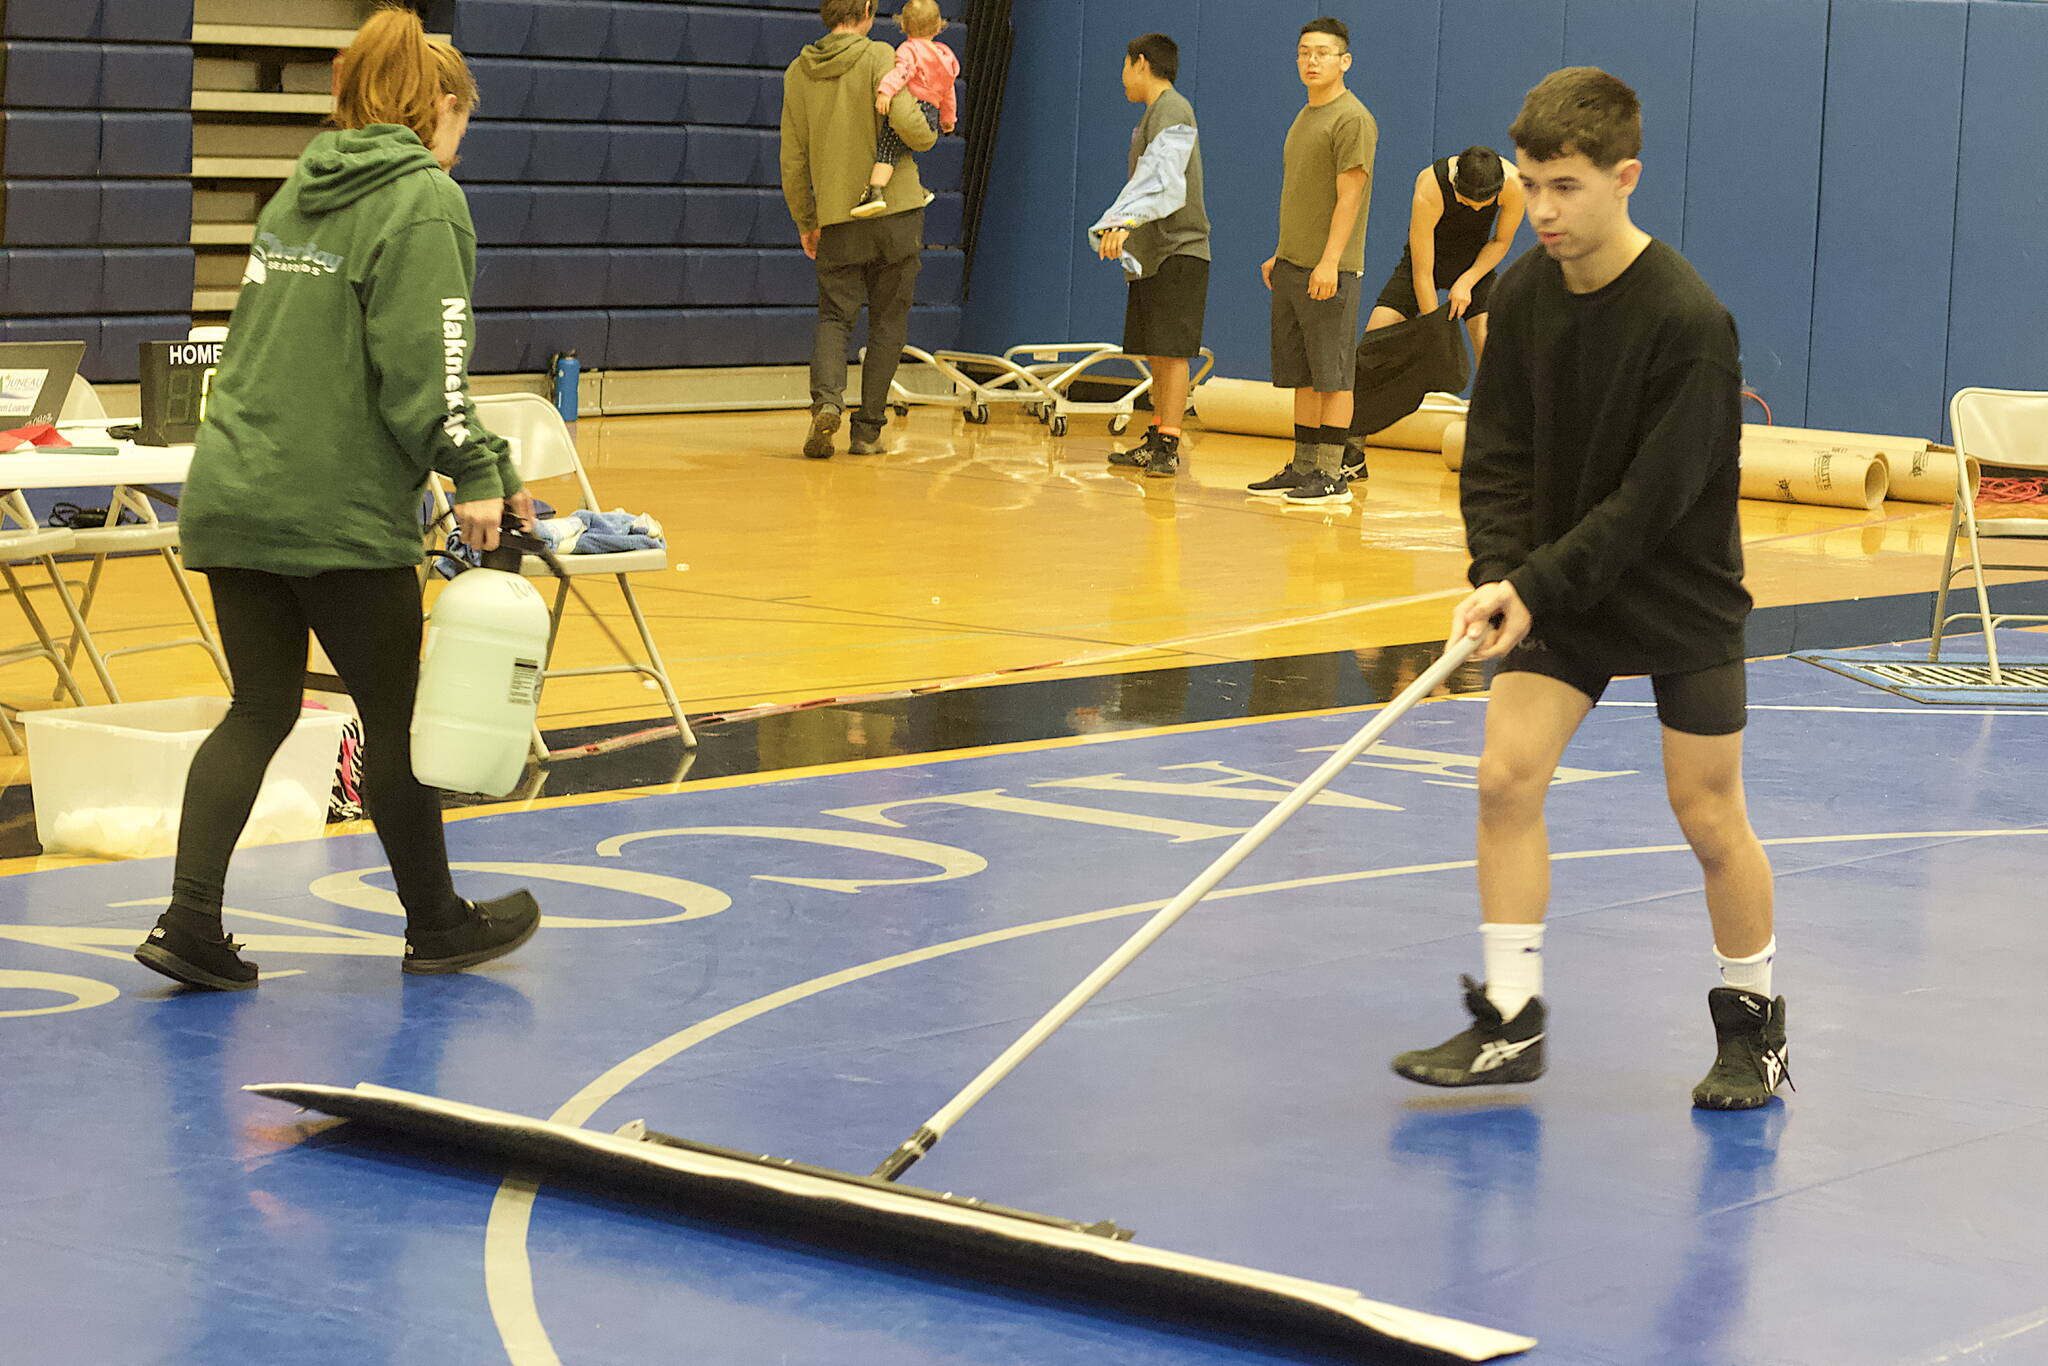 Tristan Ridgeway of Thunder Mountain High School, right, and Lakell Deinhardt of Peterburg High School clean the wrestling mats during a break in the Southeast Showdown at TMHS on Saturday. Ridgeway finished fourth in the 119-pound division of the tournament. (Mark Sabbatini / Juneau Empire)